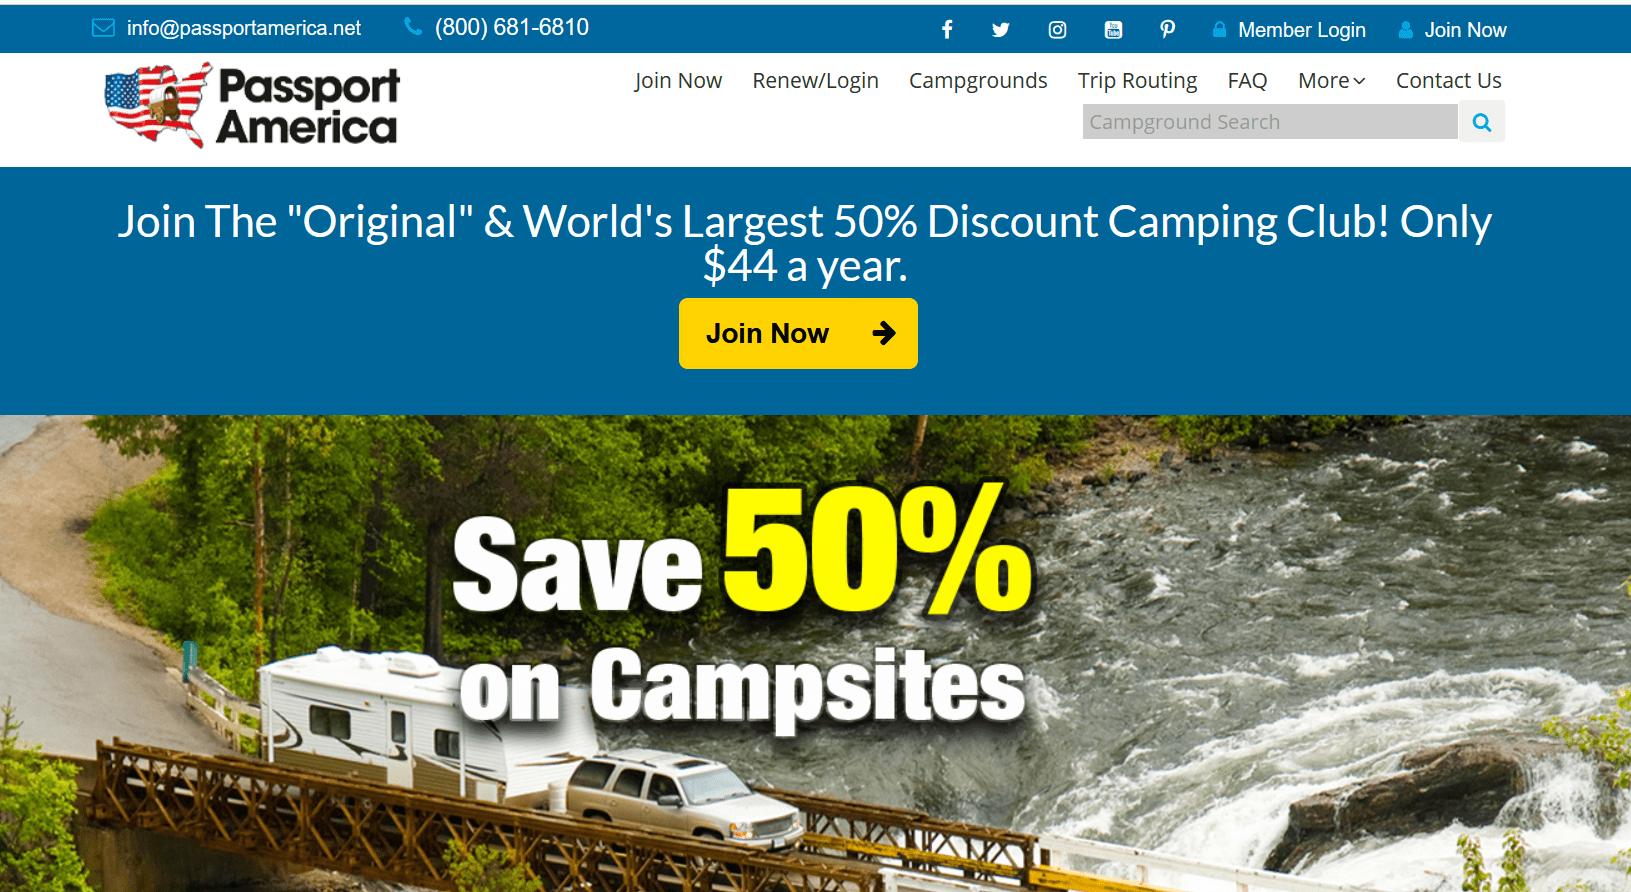 Save money on campgrounds with Passport America.